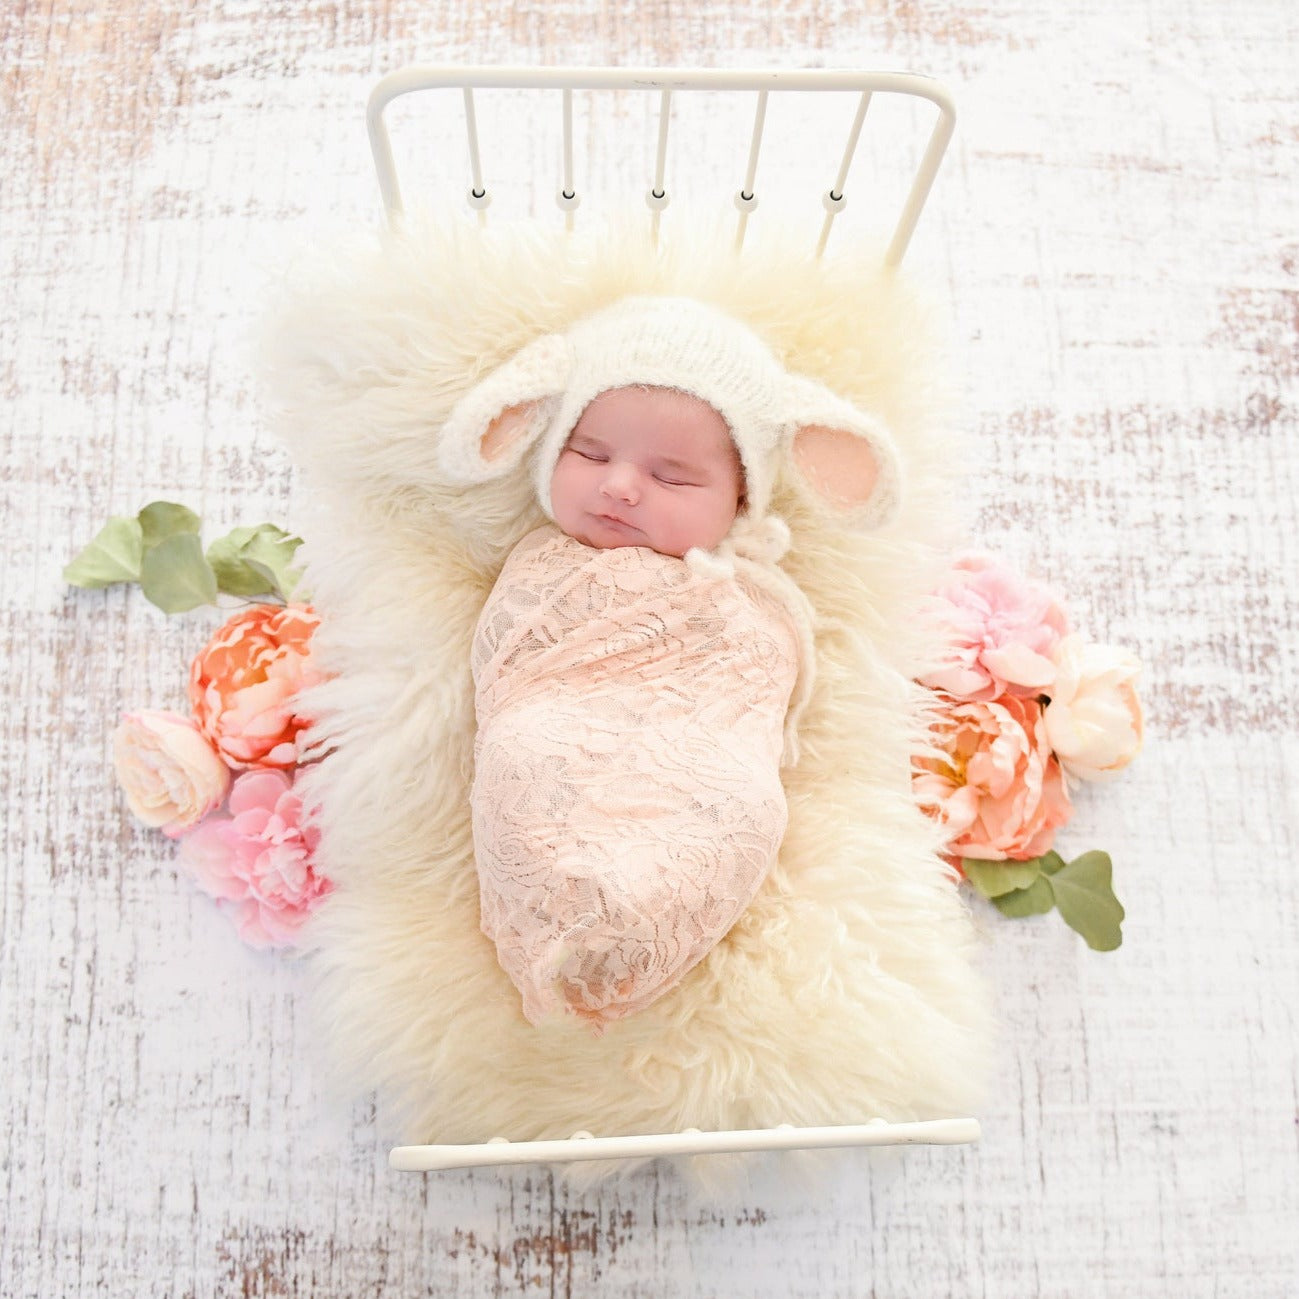 handmad knitted newborn baby lamb bonnet for photography props